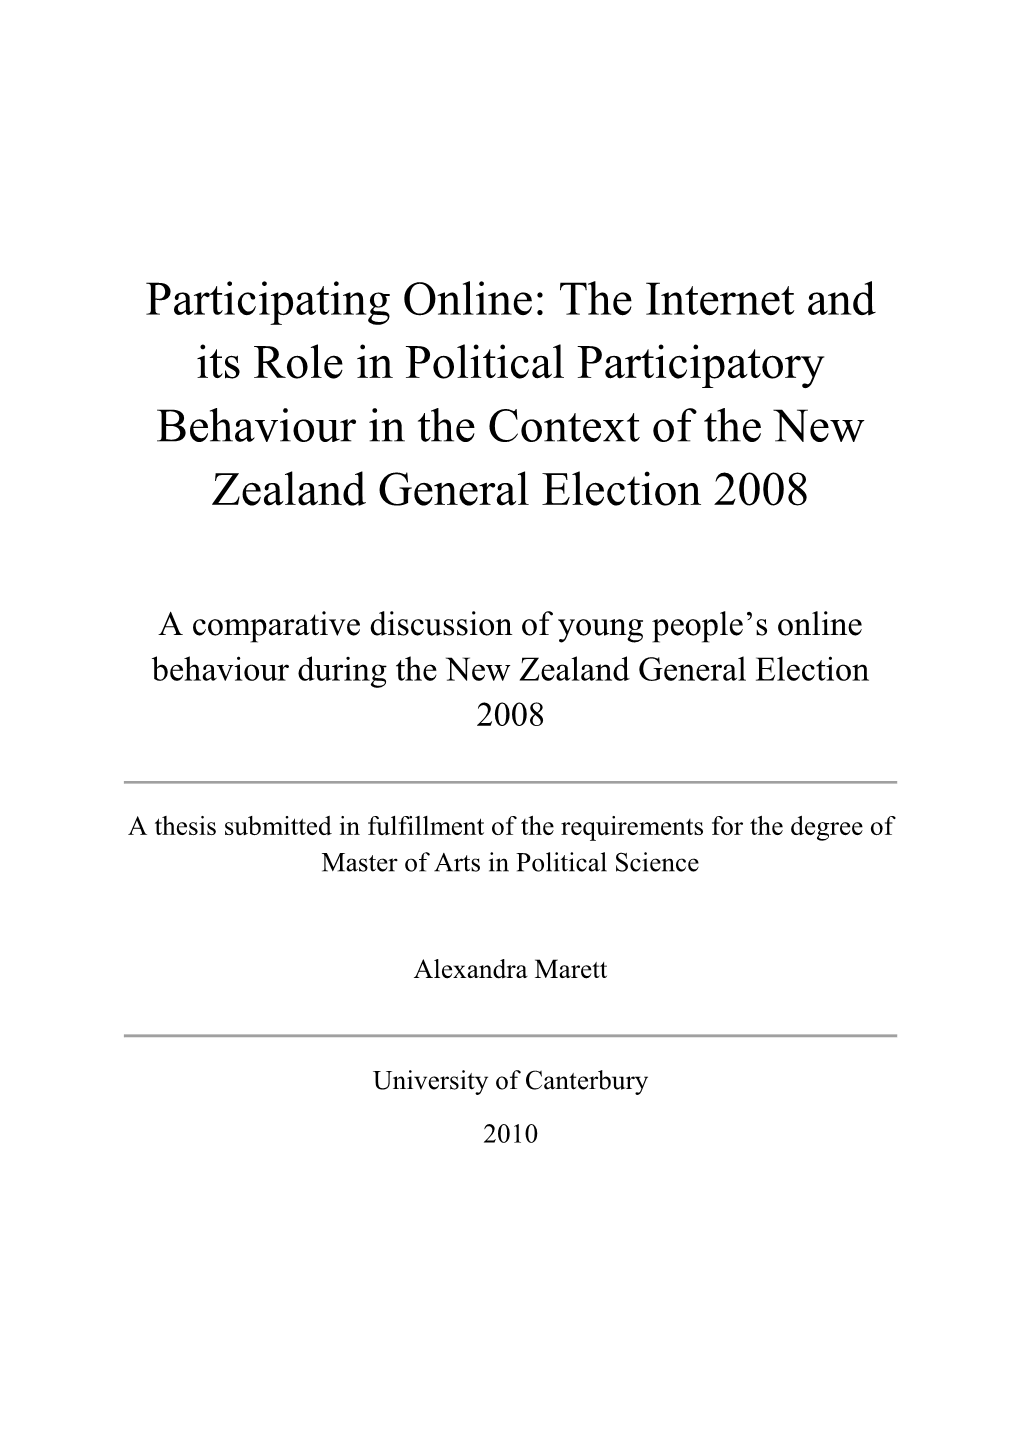 Participating Online: the Internet and Its Role in Political Participatory Behaviour in the Context of the New Zealand General Election 2008